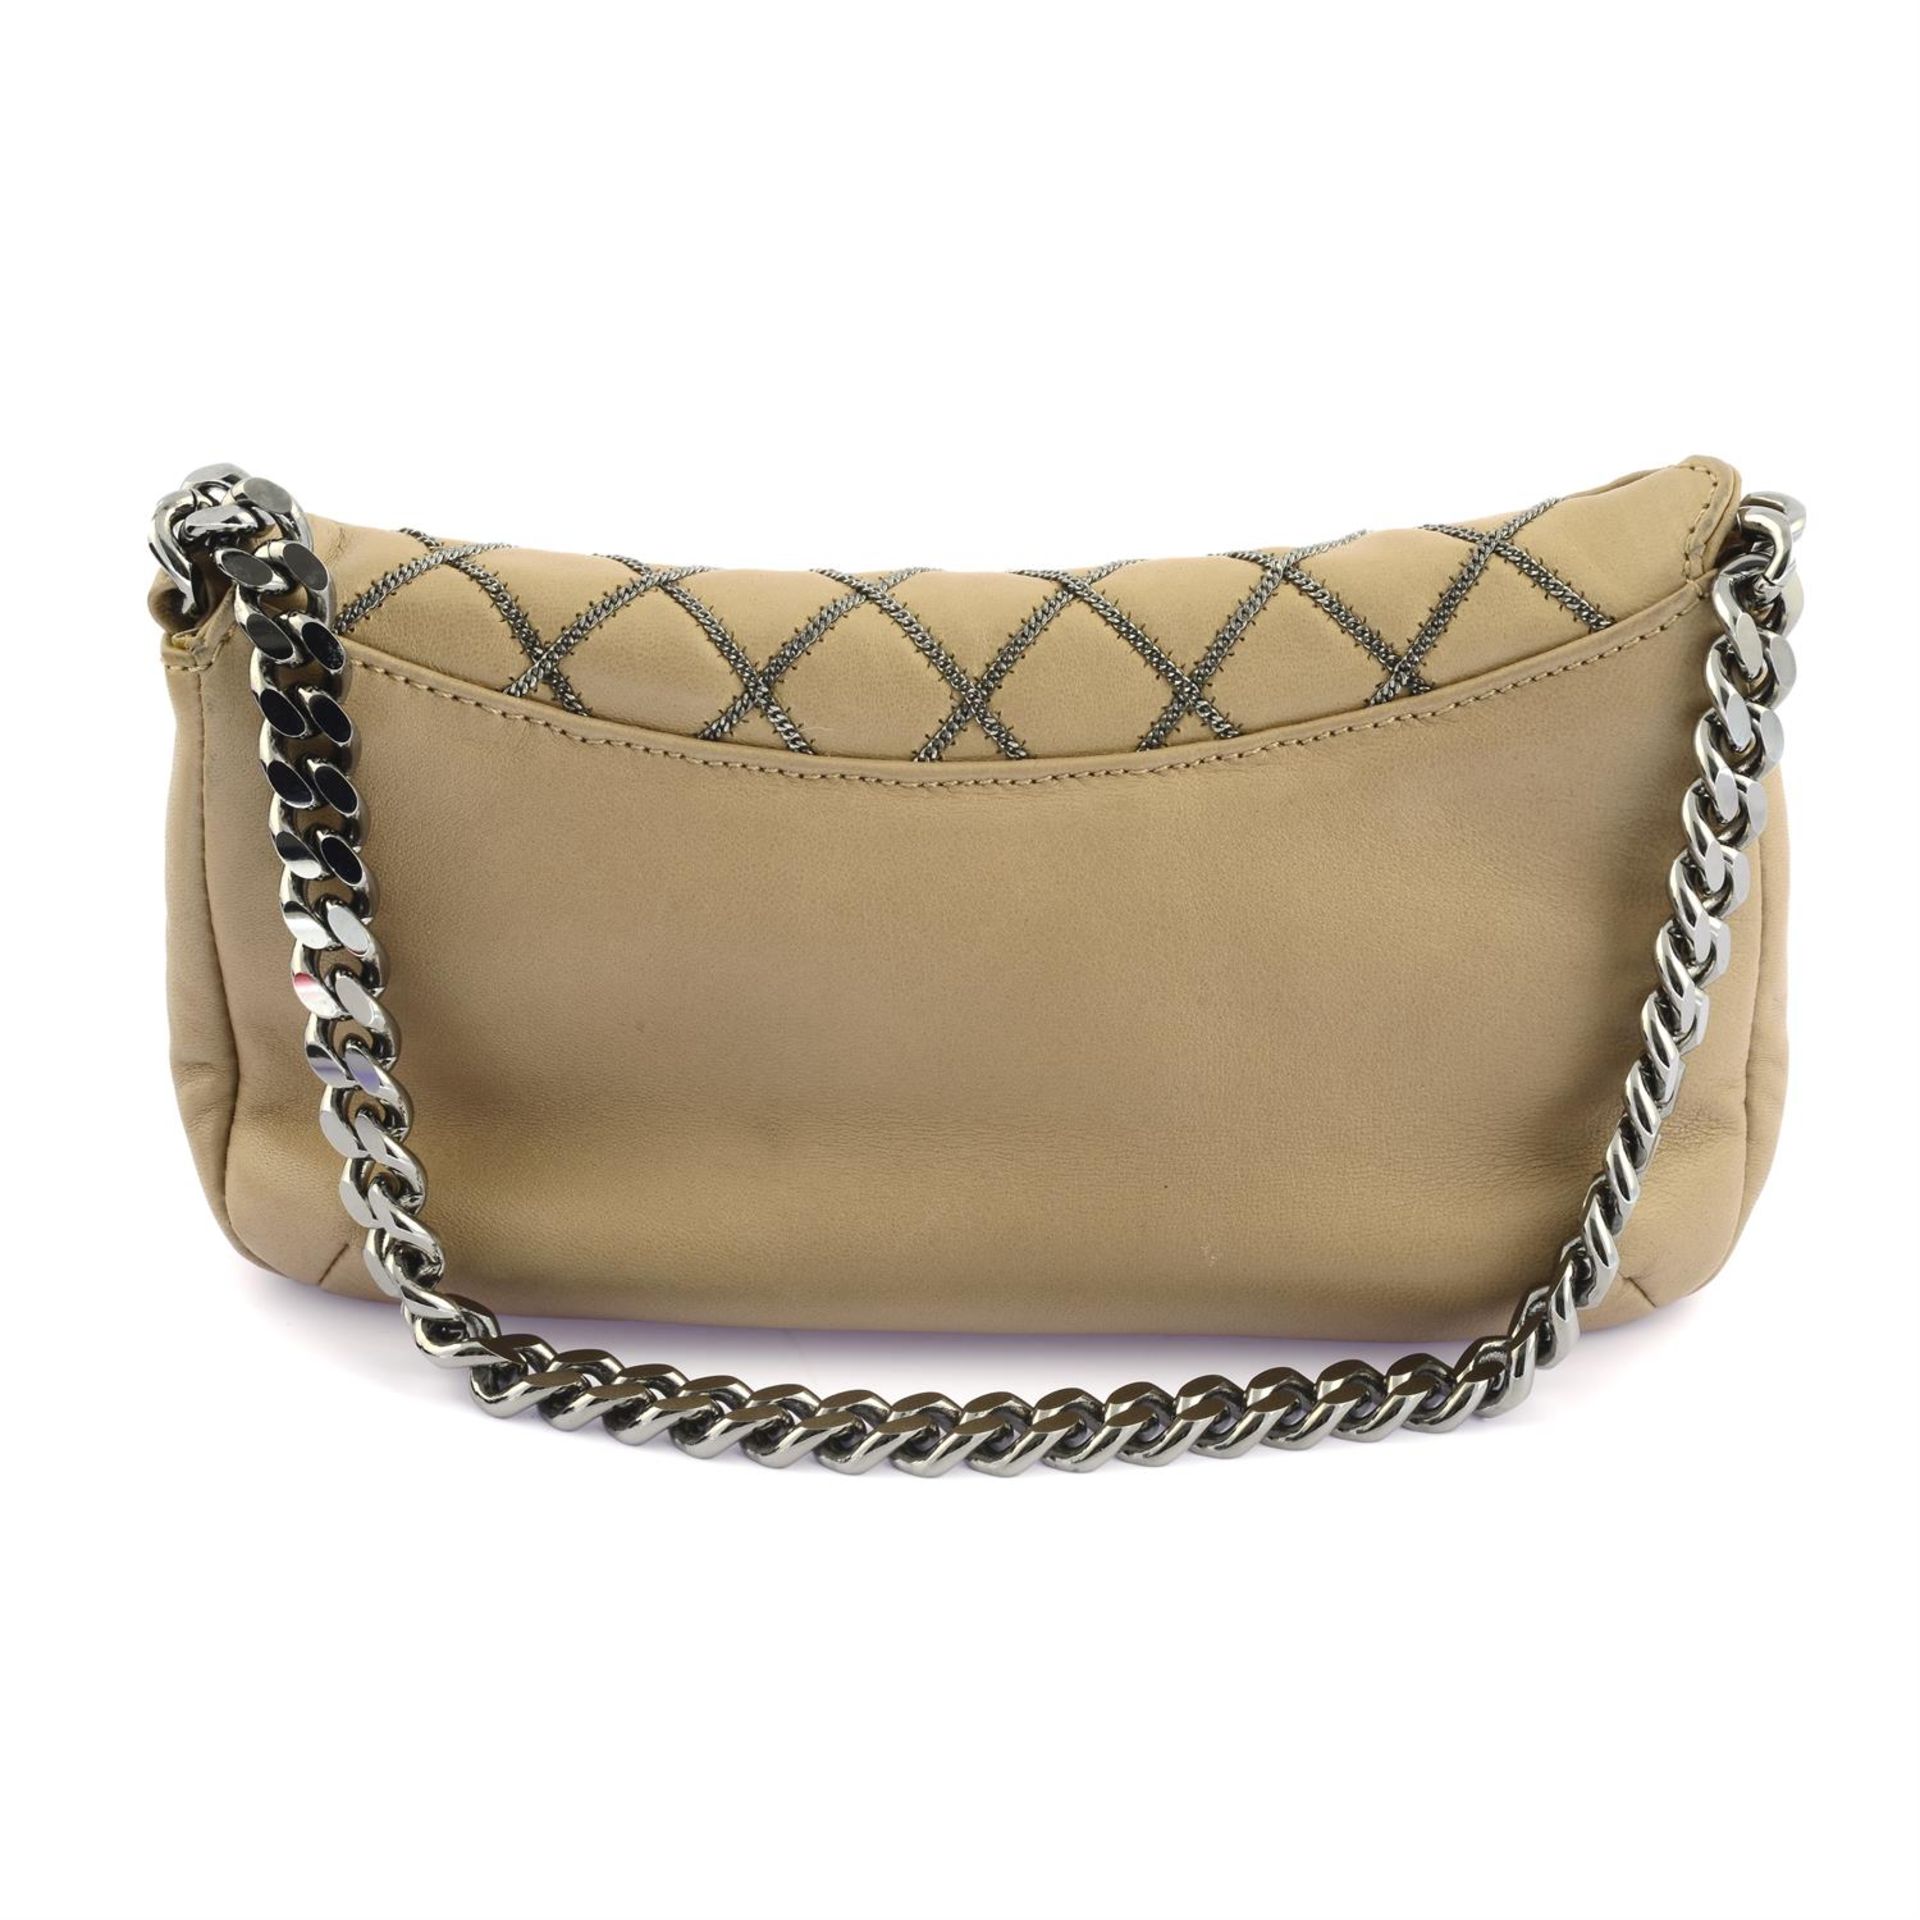 CHANEL - a beige leather chain stitch flap shoulder bag. - Image 2 of 4